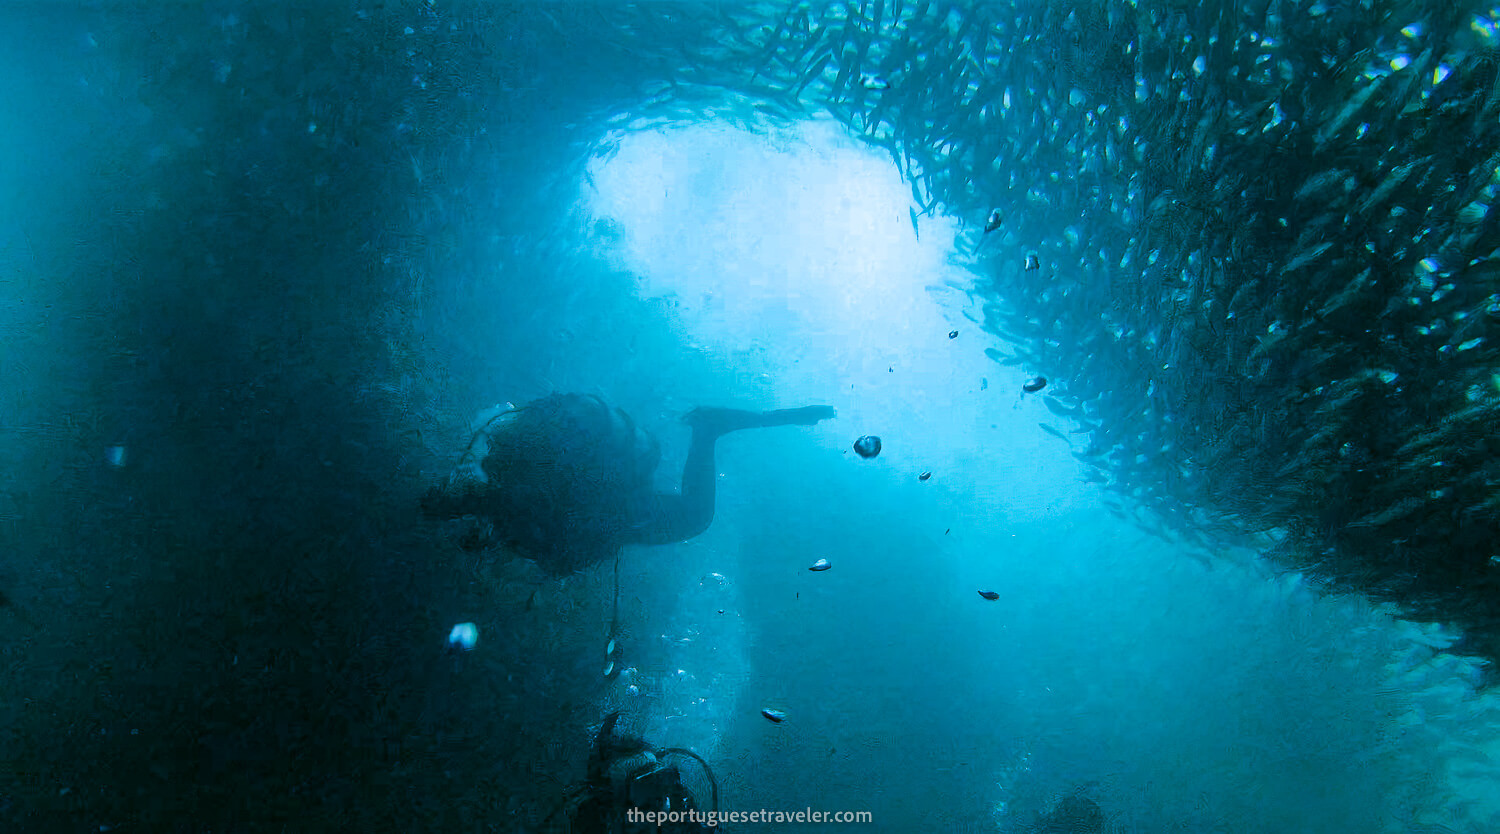 My team surrounded by fish on the Kicker Rock dive